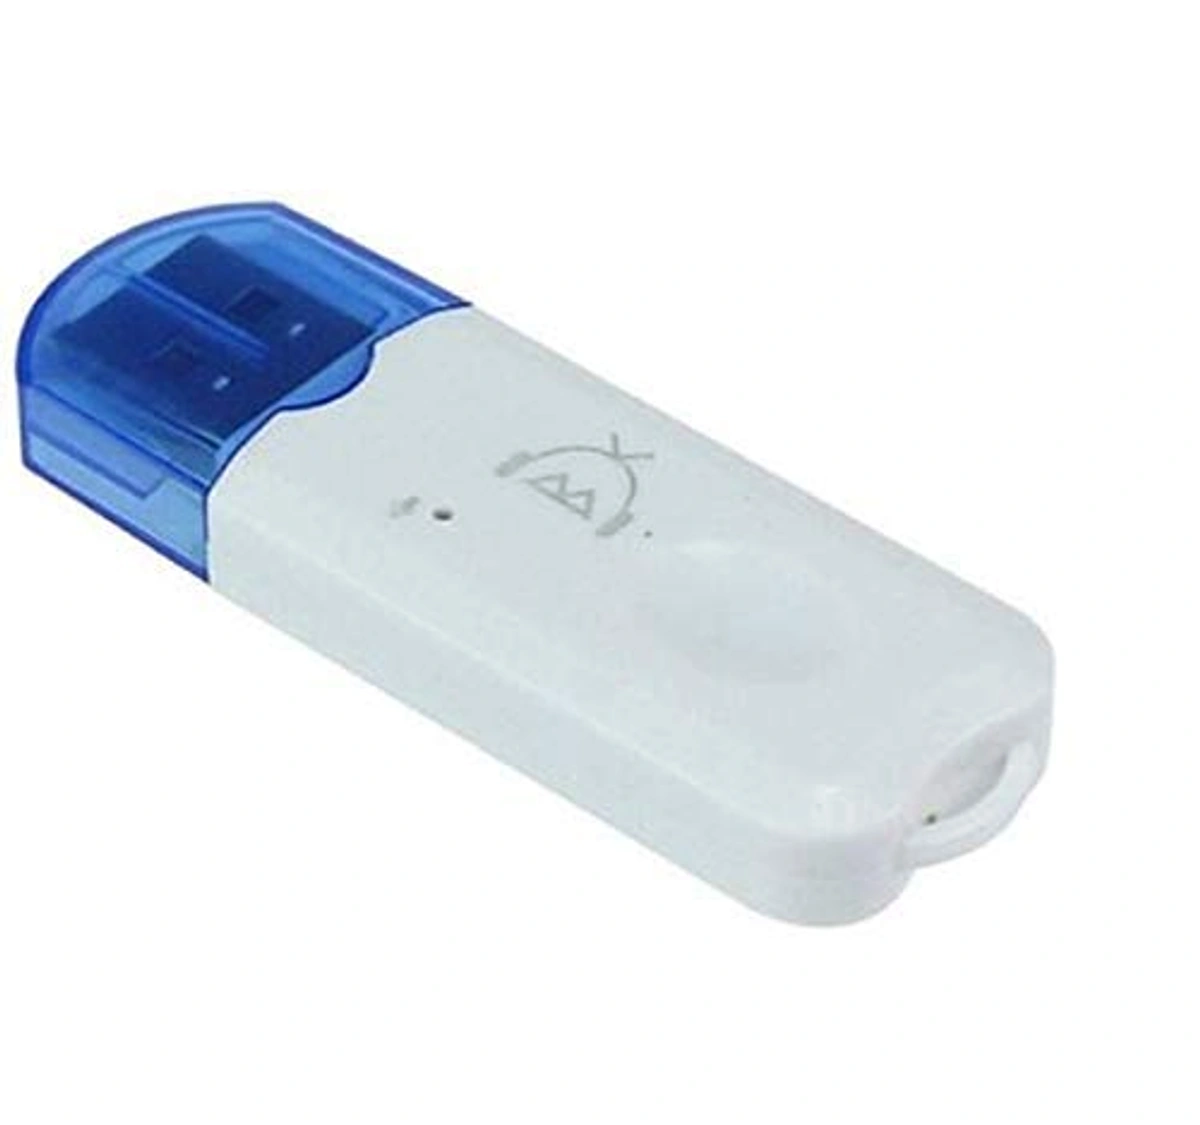 Buy USB Bluetooth Dongle Car Bluetooth At Sehgall - G122